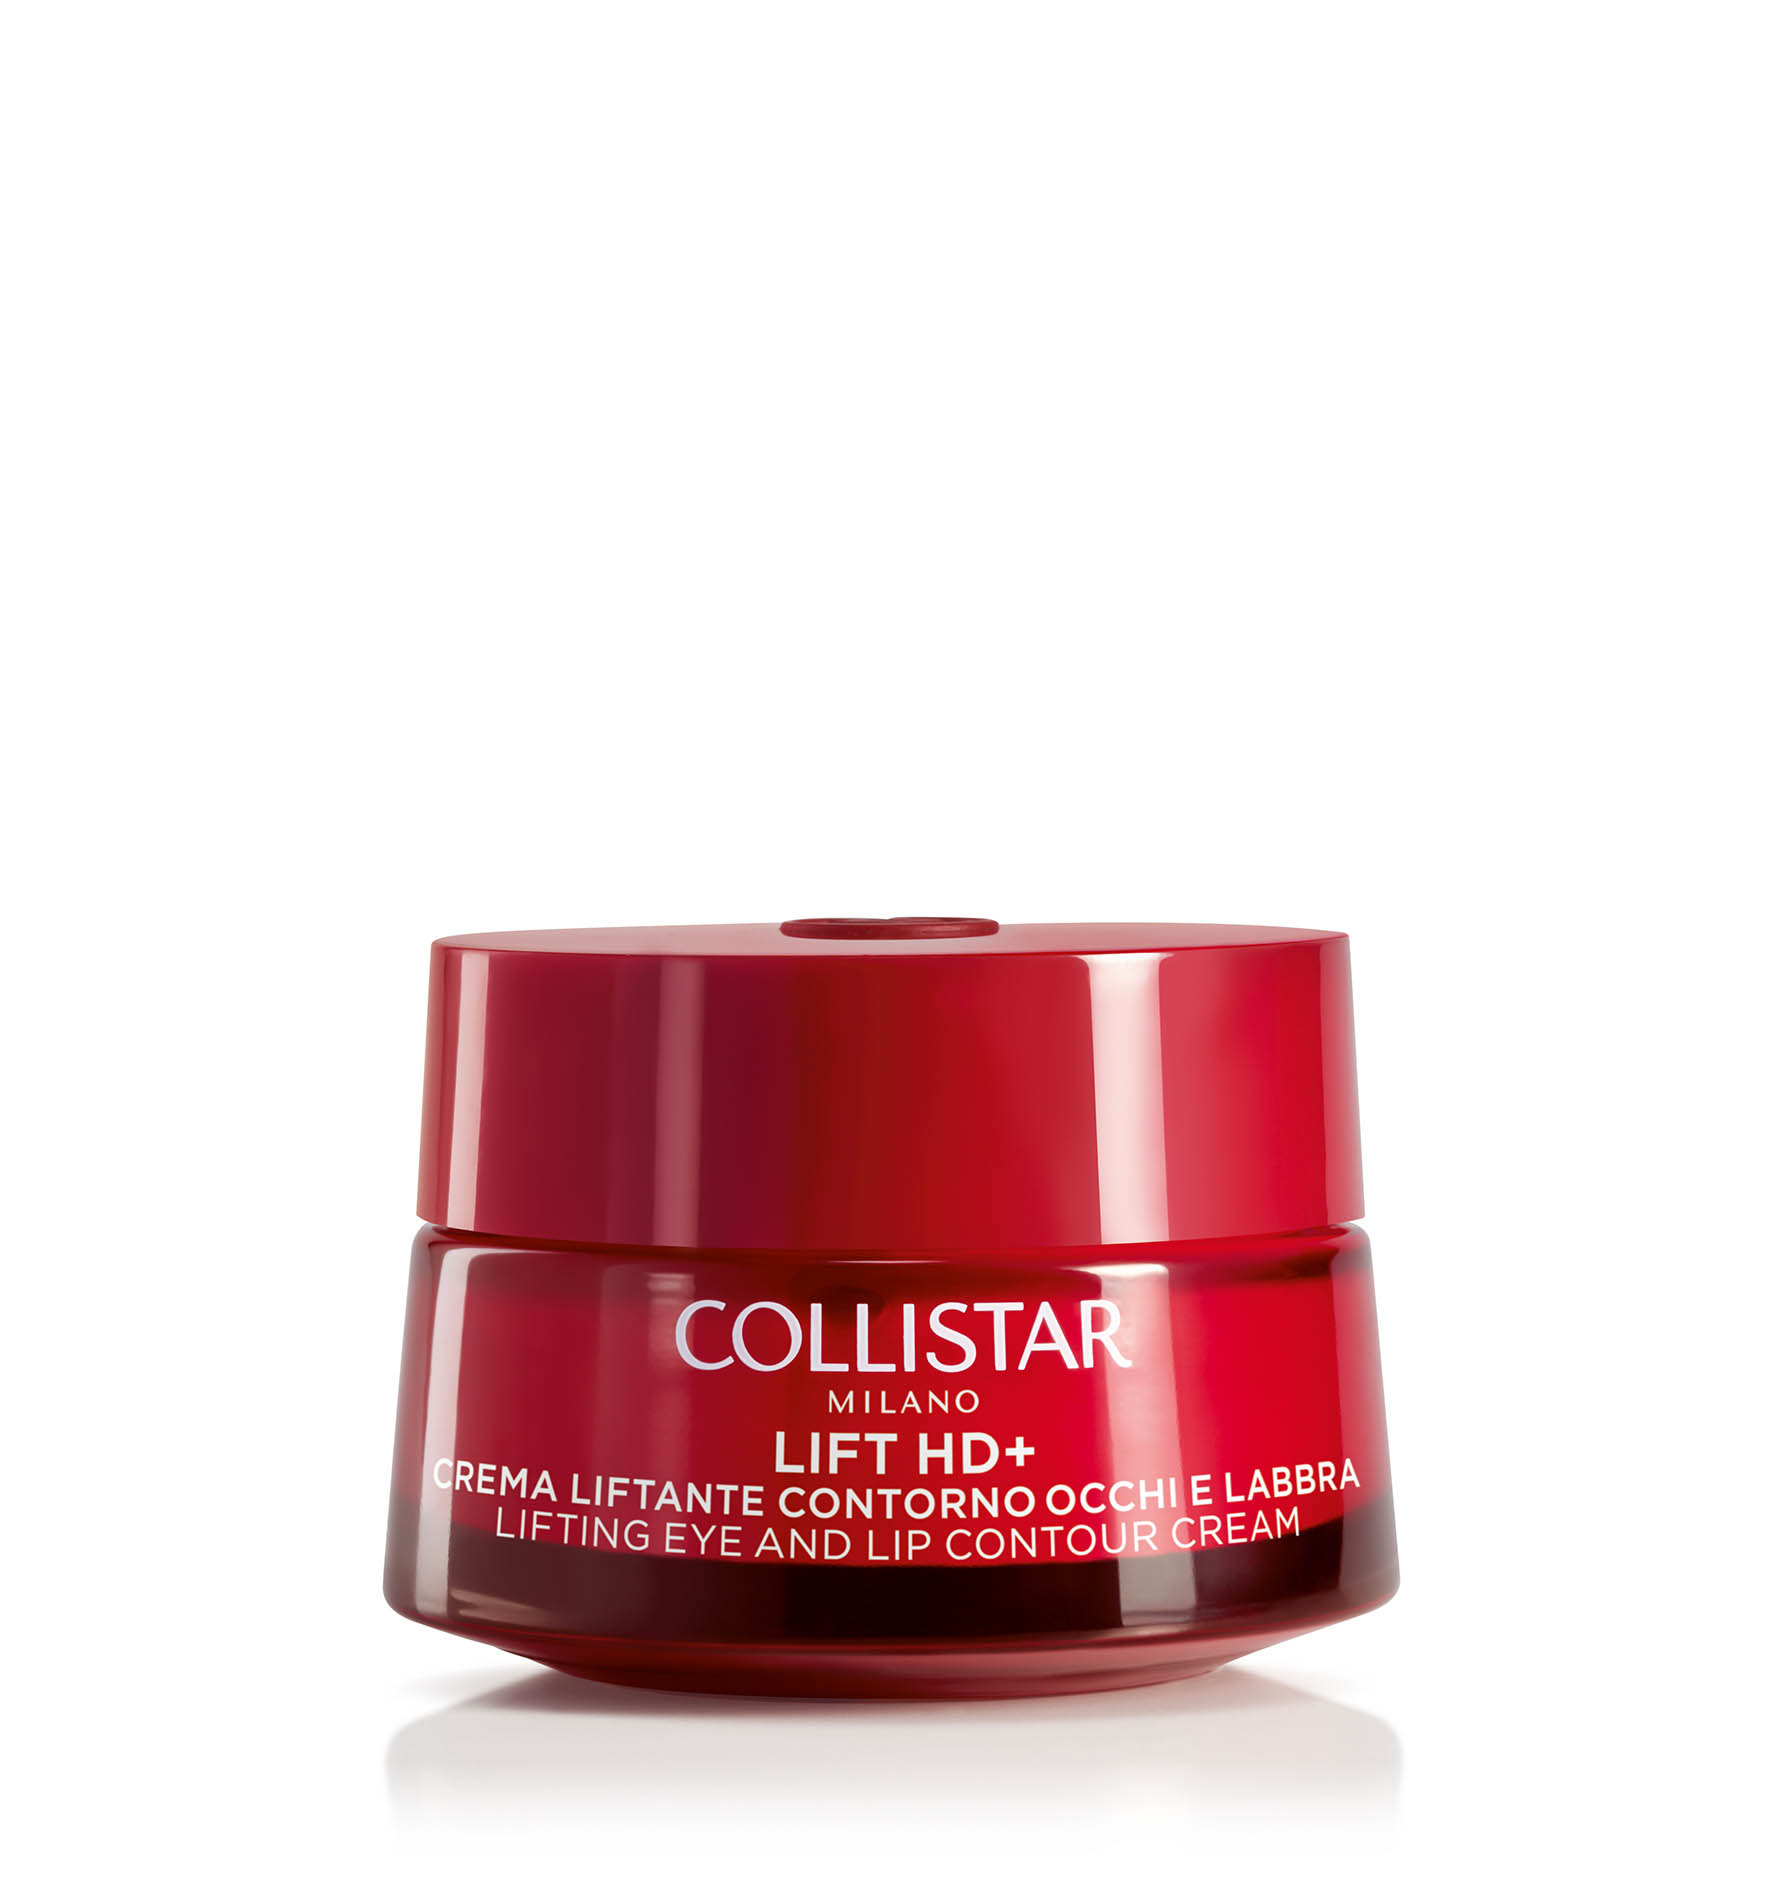 LIFT HD+ LIFTING EYE AND LIP CONTOUR CREAM - NEW | Collistar - Shop Online Ufficiale